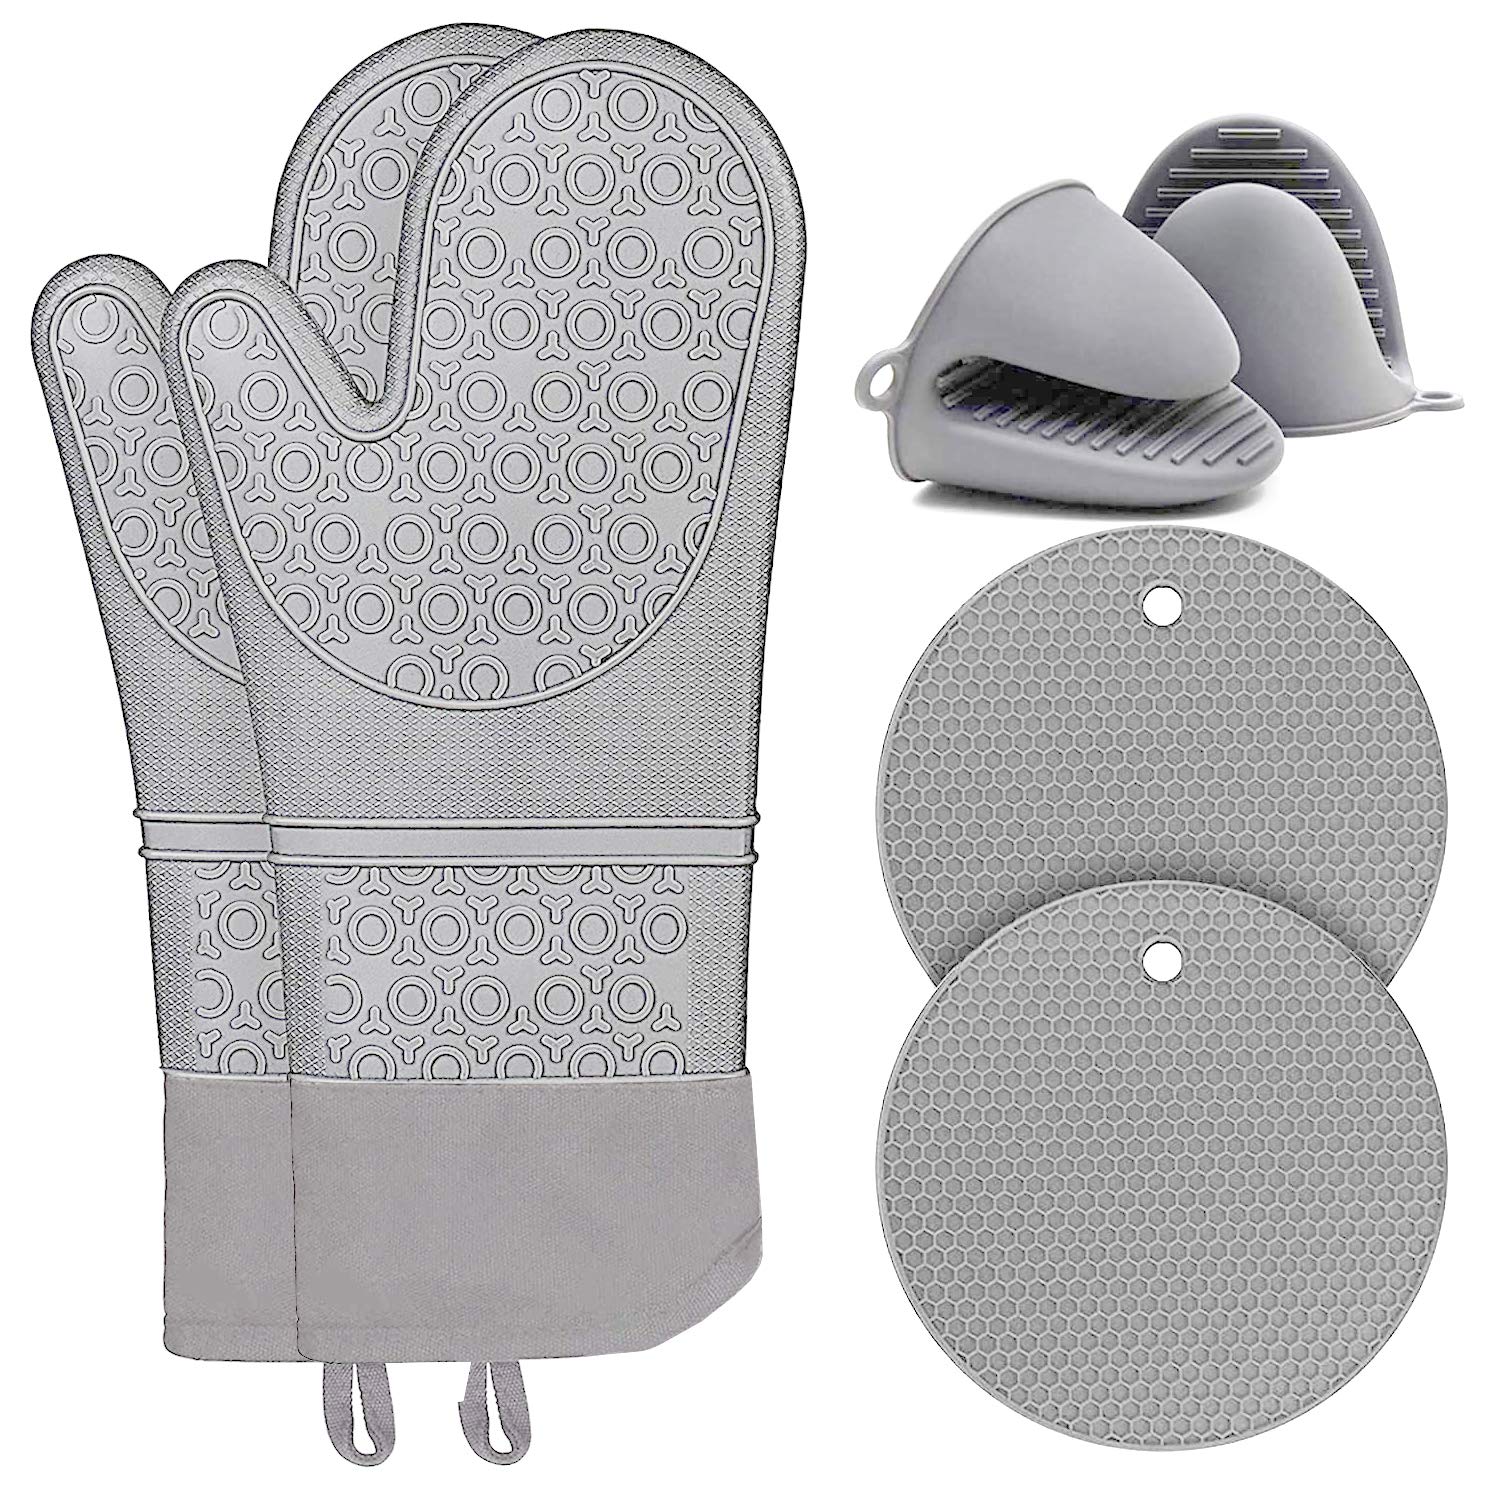 Hbsite Silicone Oven Gloves with Pot Holders and Trivet Mats, Kitchen Oven Mitts Double Heat Resistant for Cooking, Grilling, Baking, Barbecue, 6Pcs/1 set